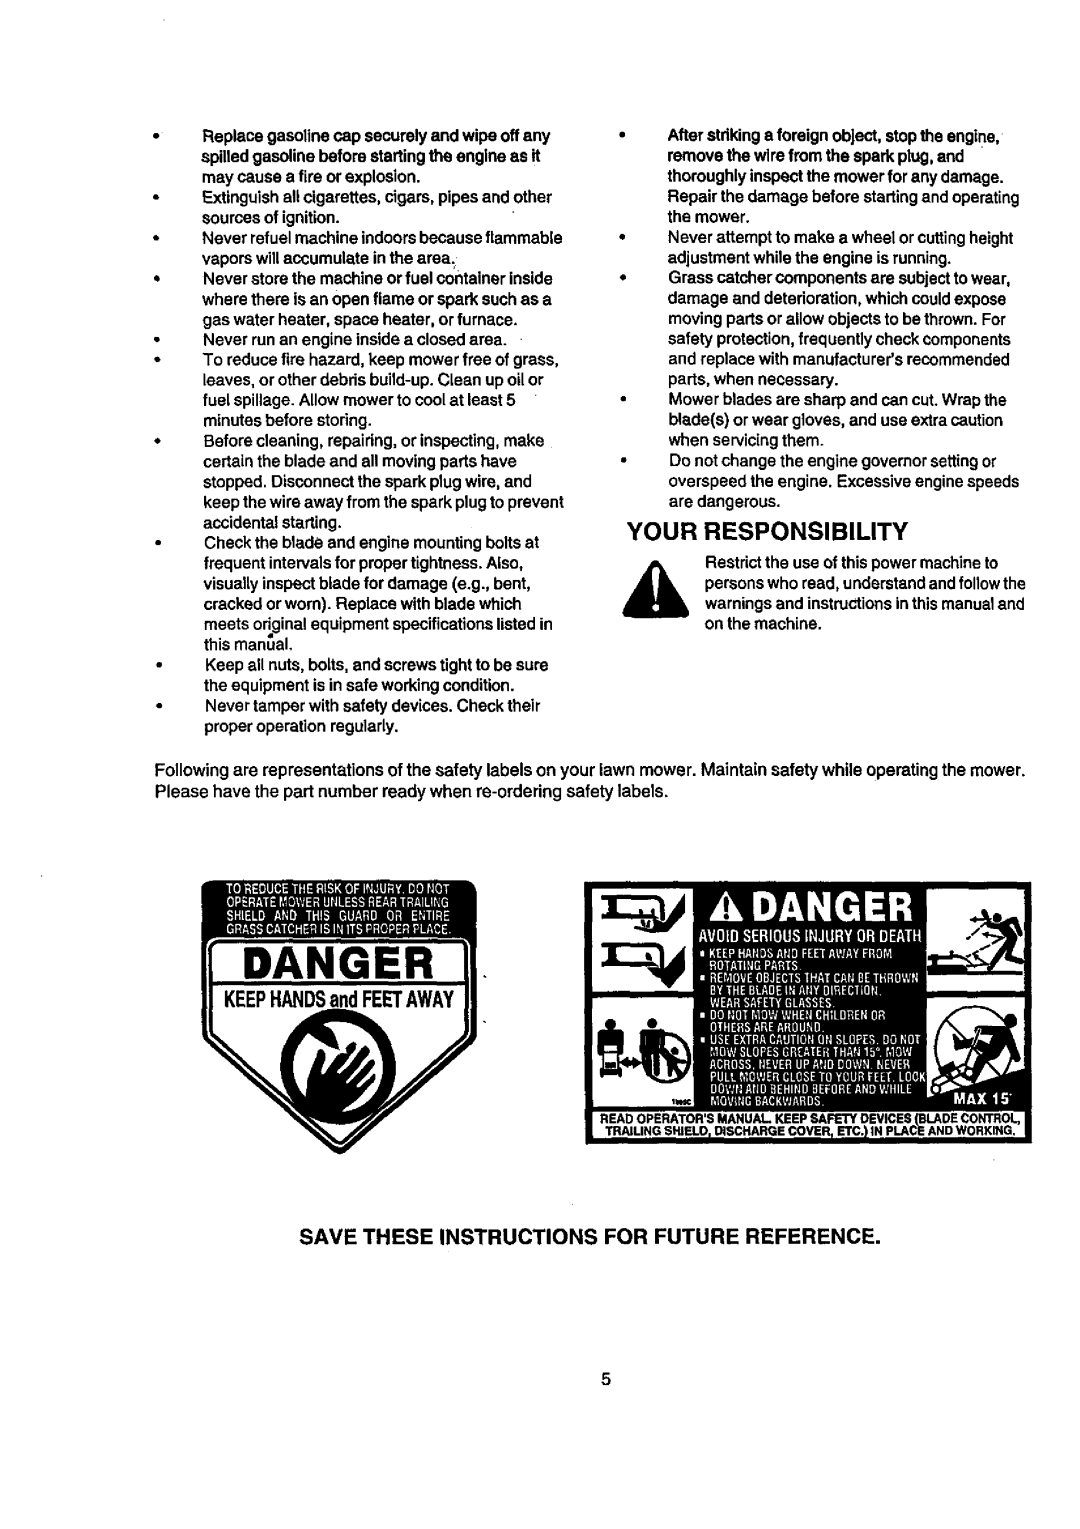 Craftsman 247.388240 owner manual Danger, Your Responsibility, Save These Instructions For Future Reference 